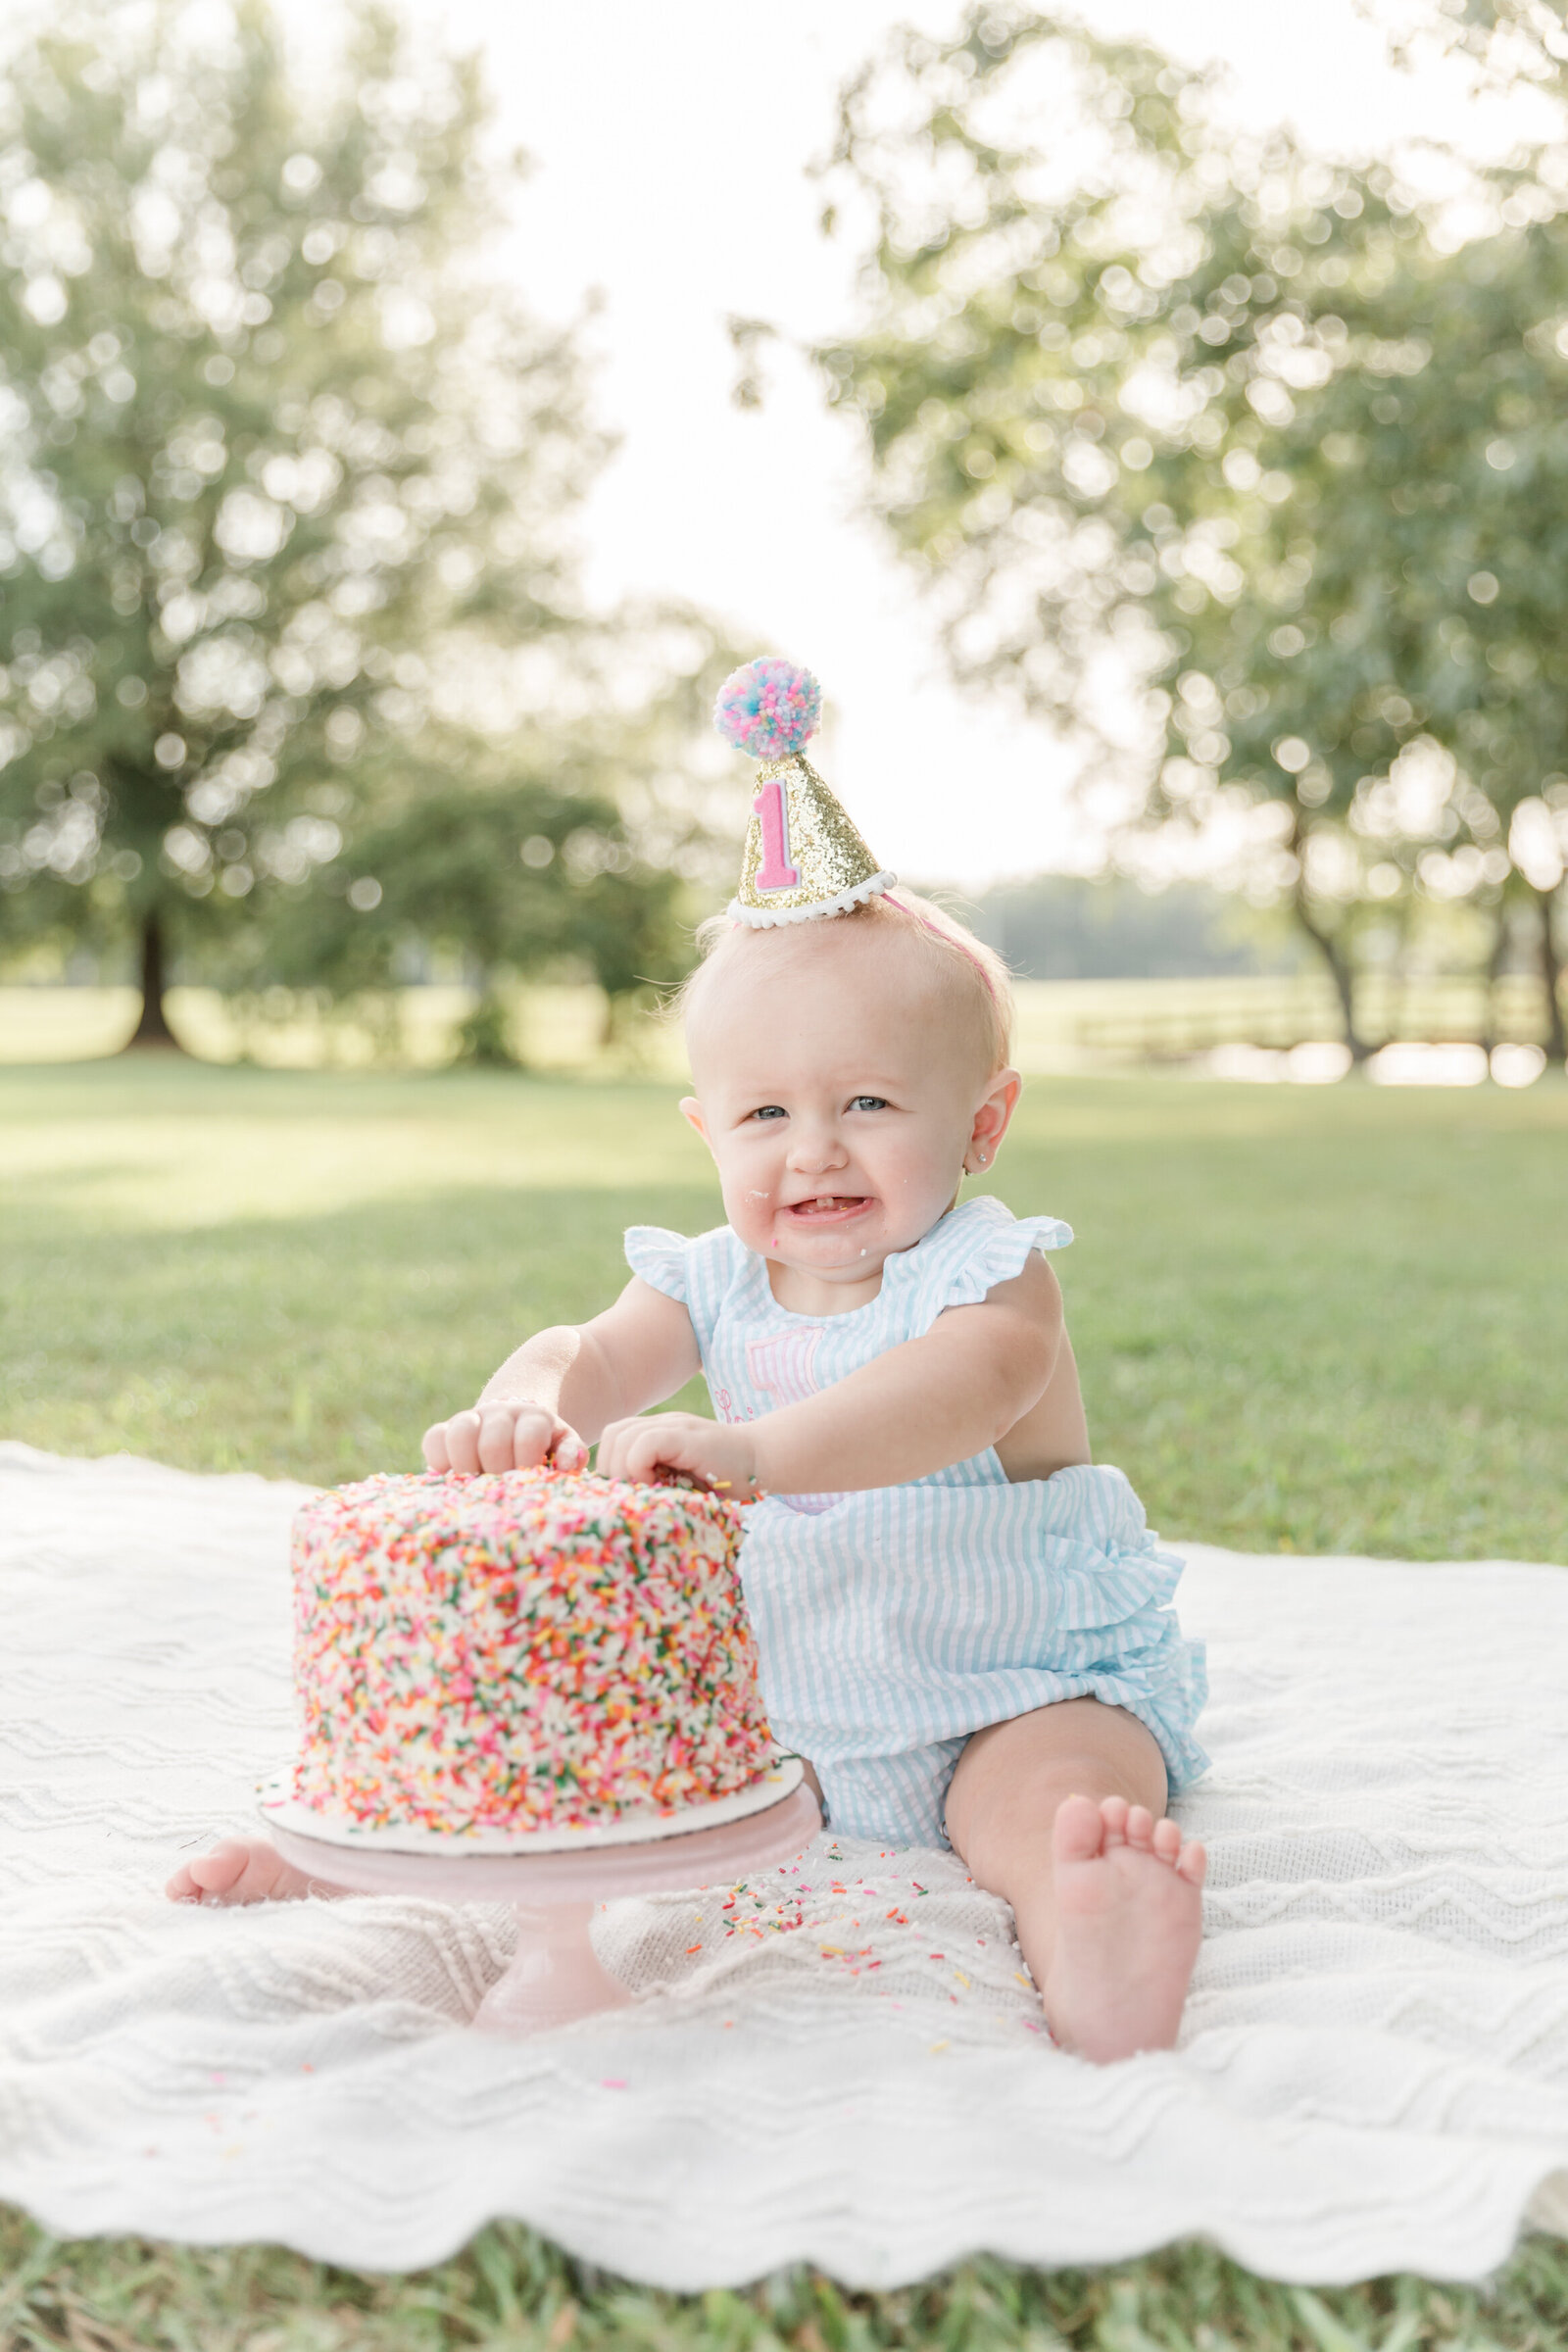 One year old smiling in a party hat while grabbing a sprinkle covered birthday cake.